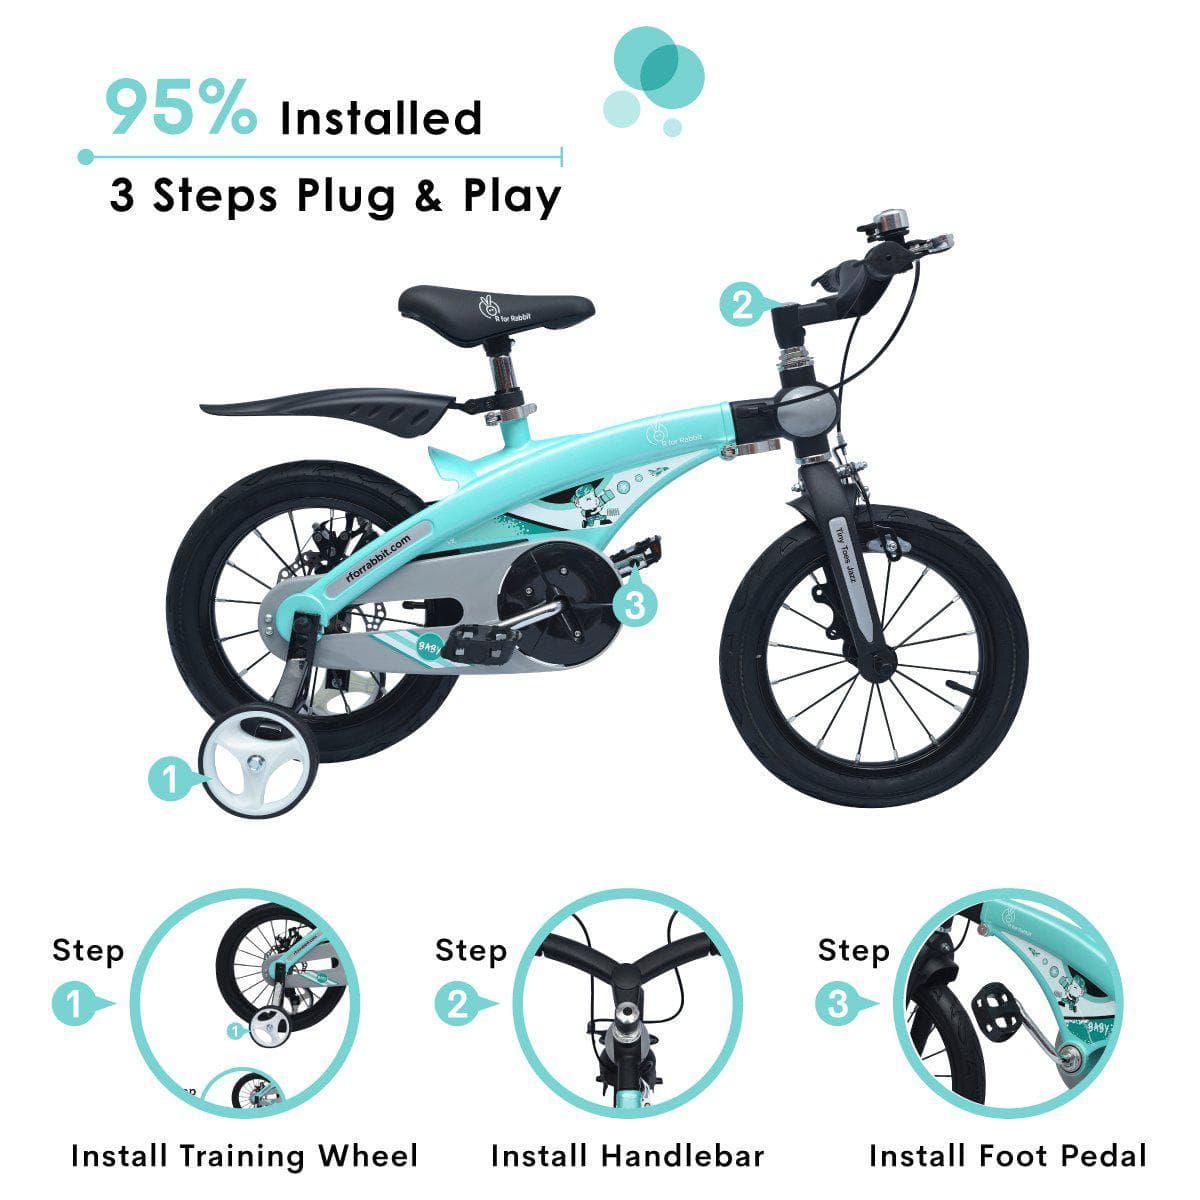 Tiny Toes Jazz - The Smart Plug and Play Bicycle - 14 inch (Lake Blue) | R for Rabbit by R for Rabbit, India Baby Transport